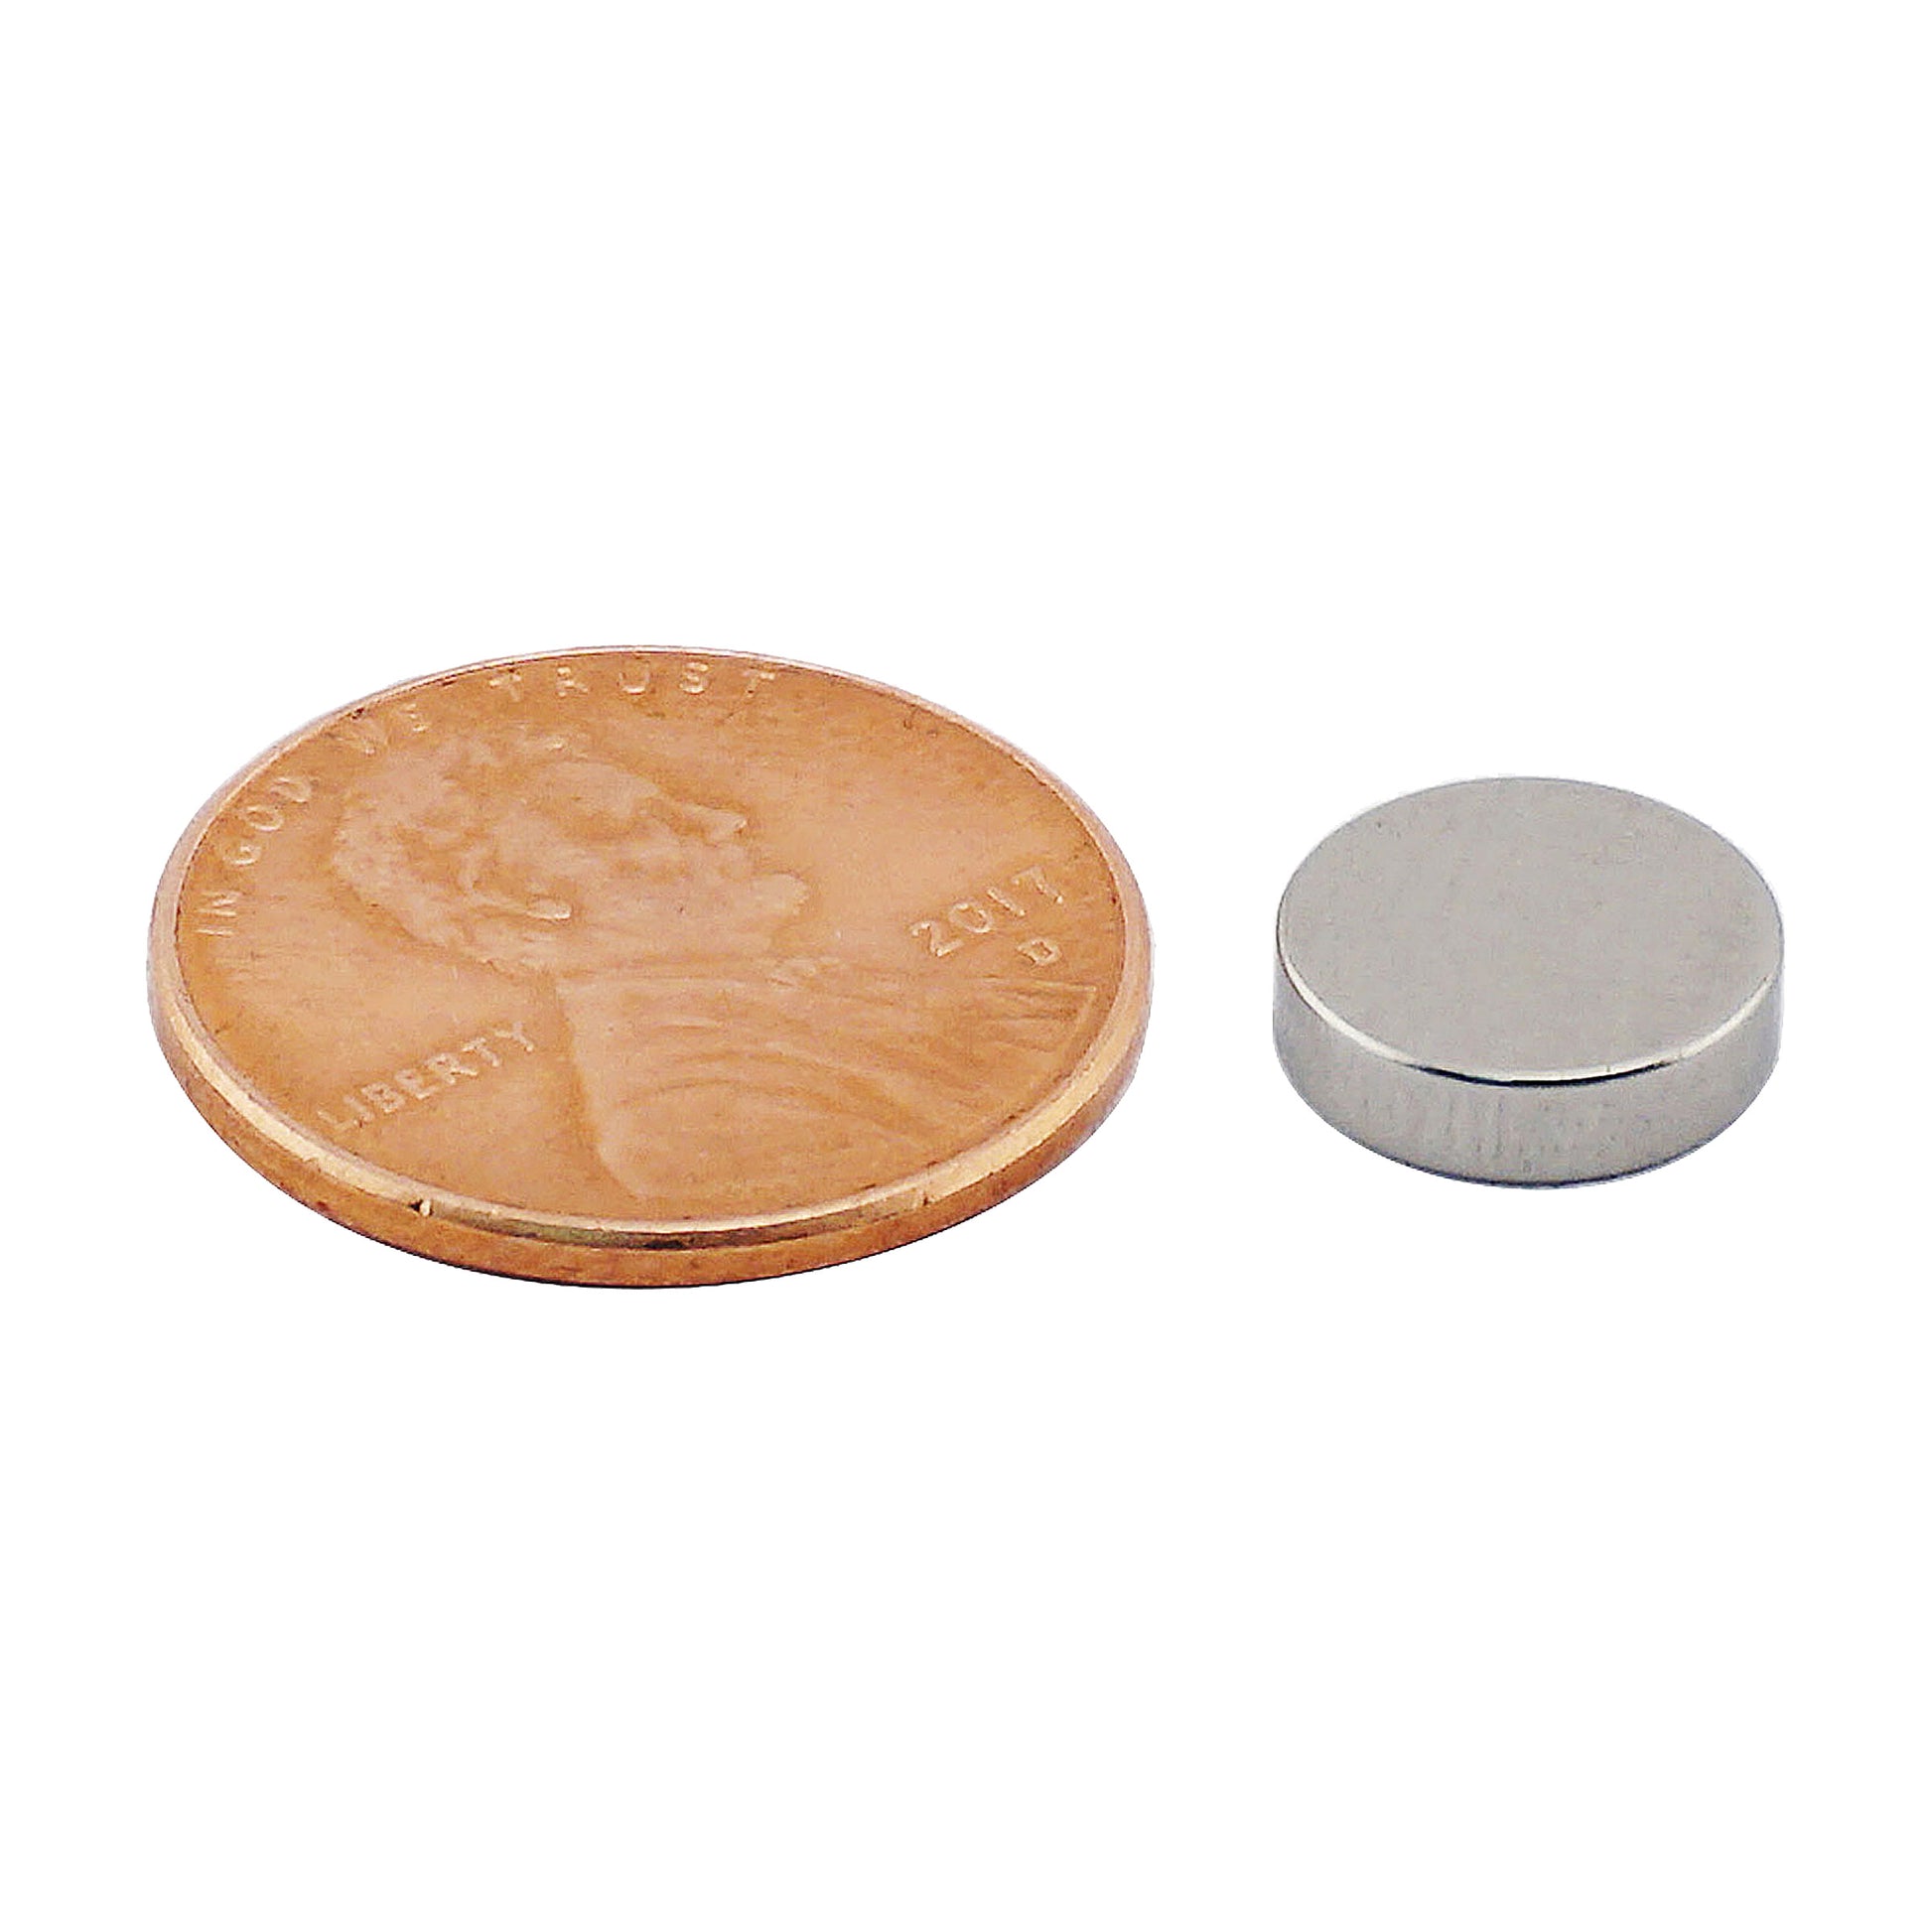 Load image into Gallery viewer, ND45-3710N Neodymium Disc Magnet - Compared to Penny for Size Reference